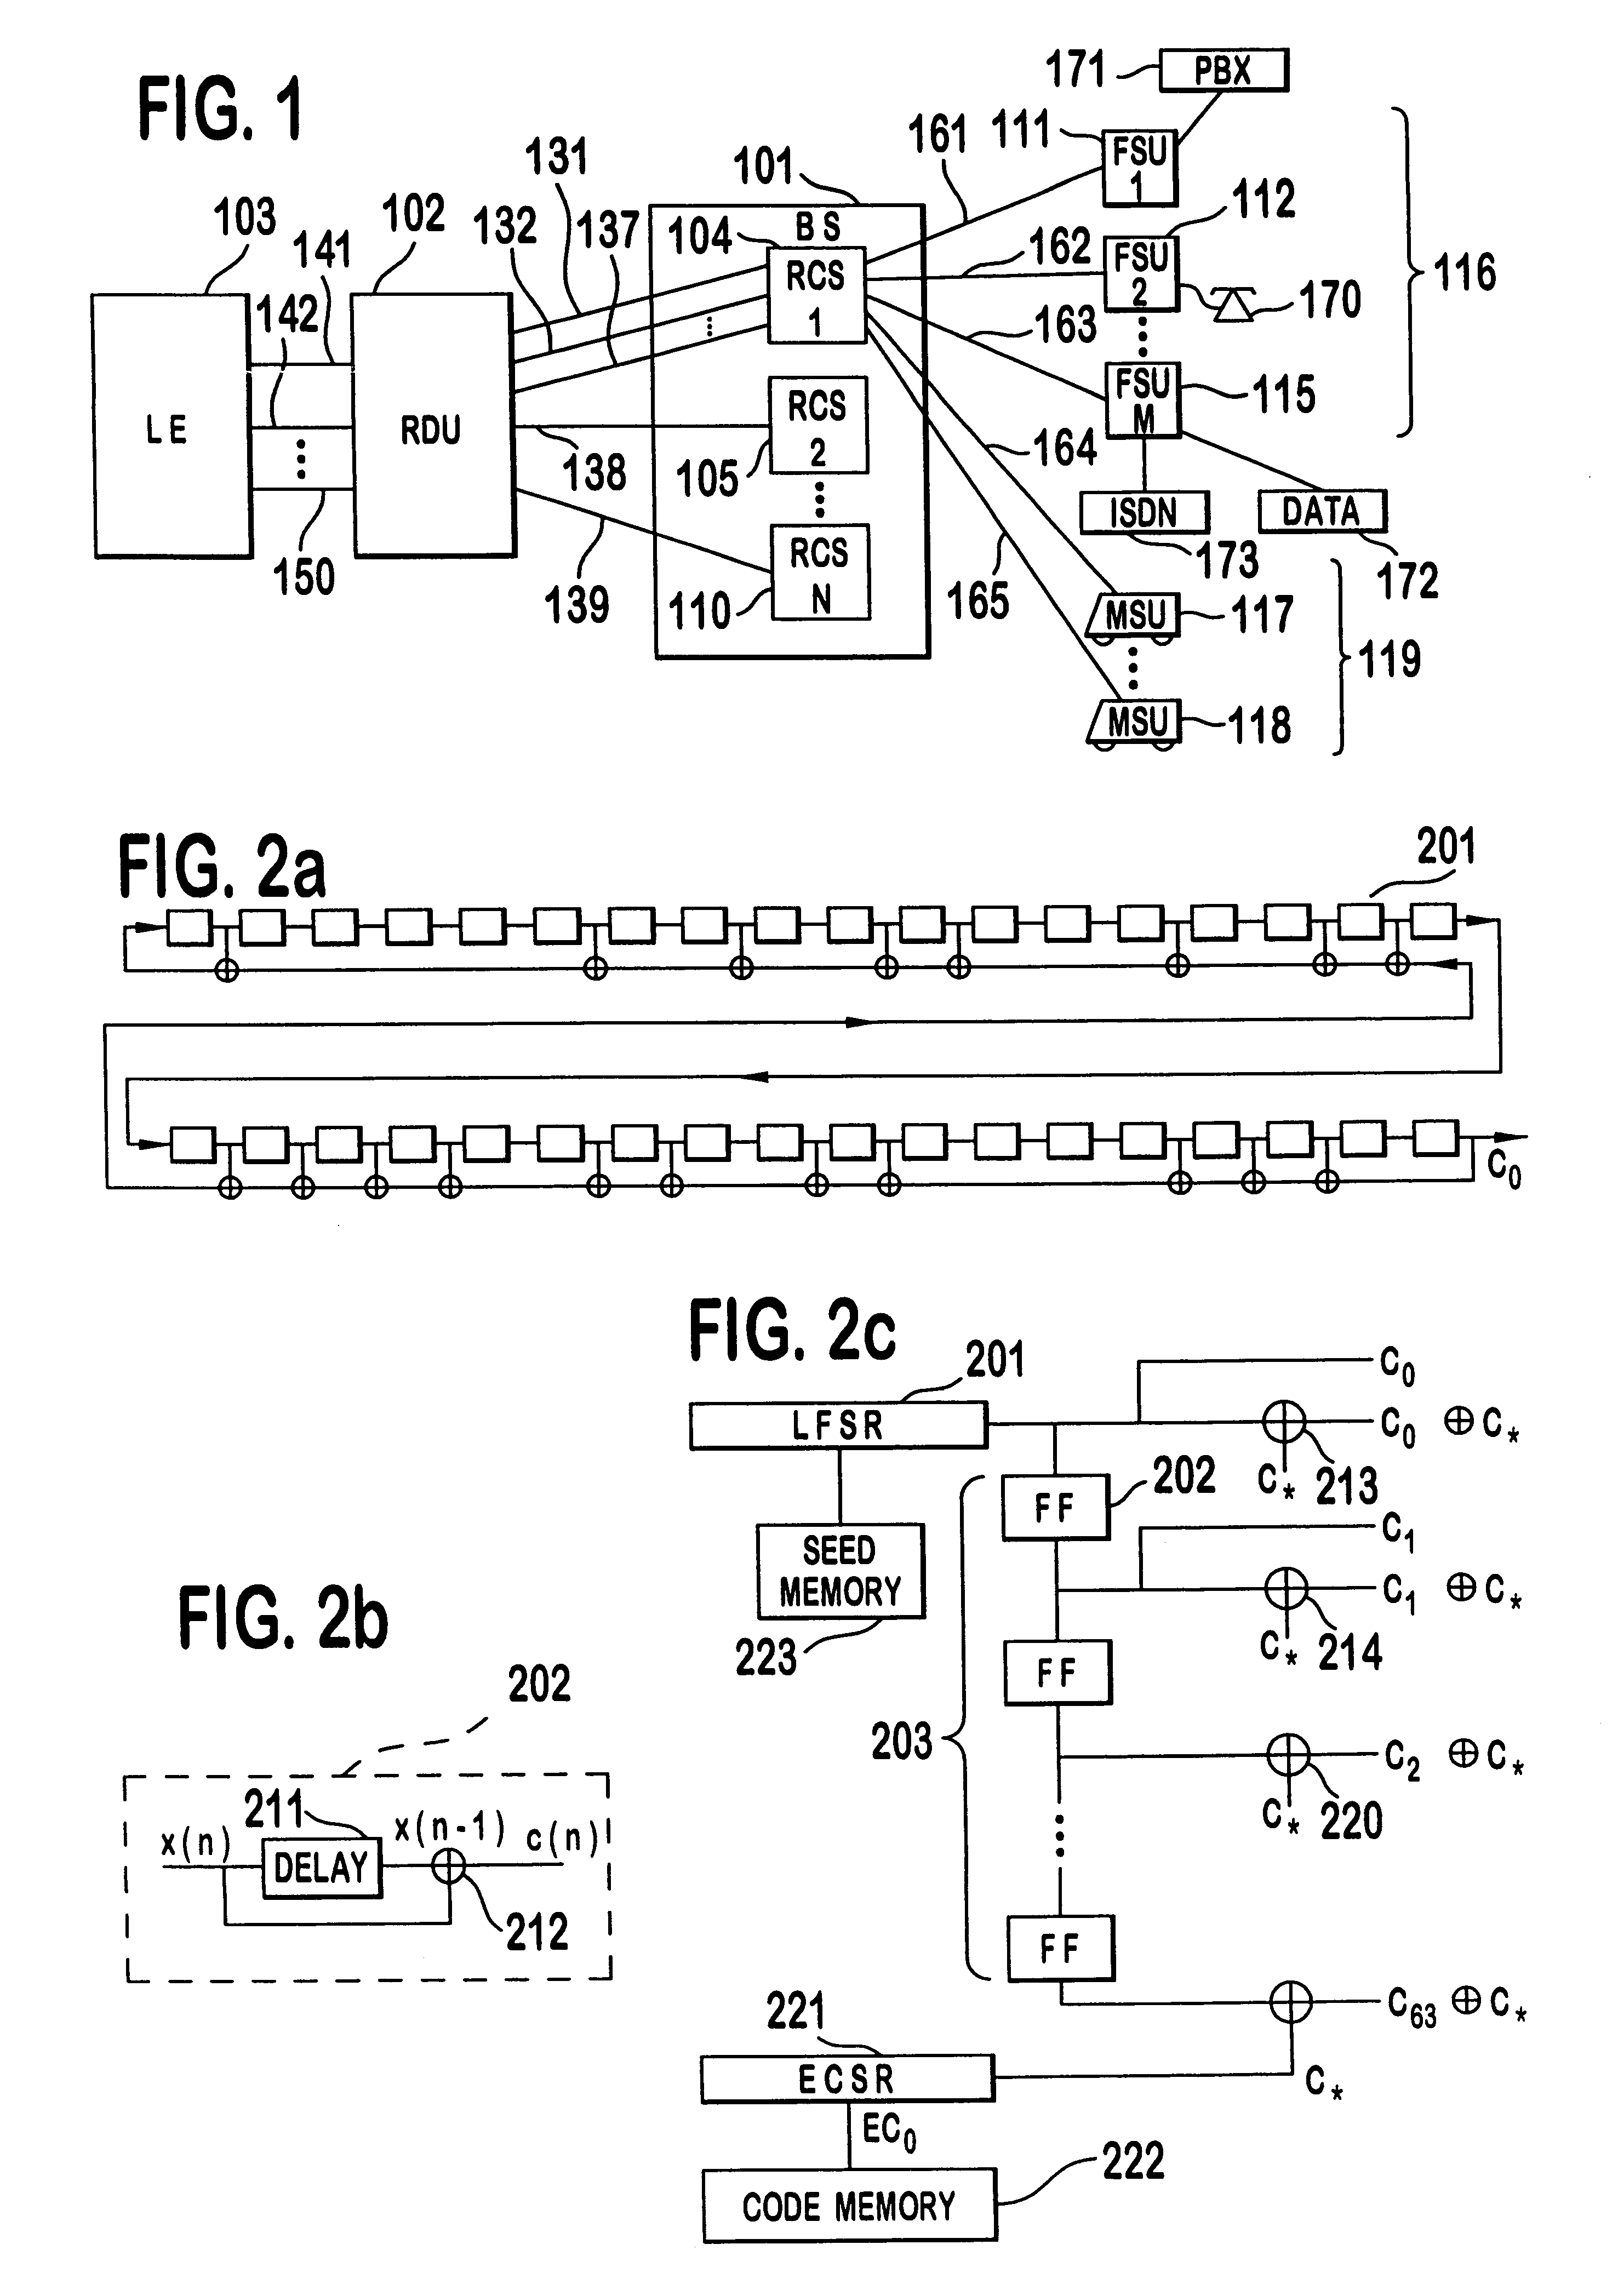 Capacity management method for a code division multiple access (CDMA) communication system